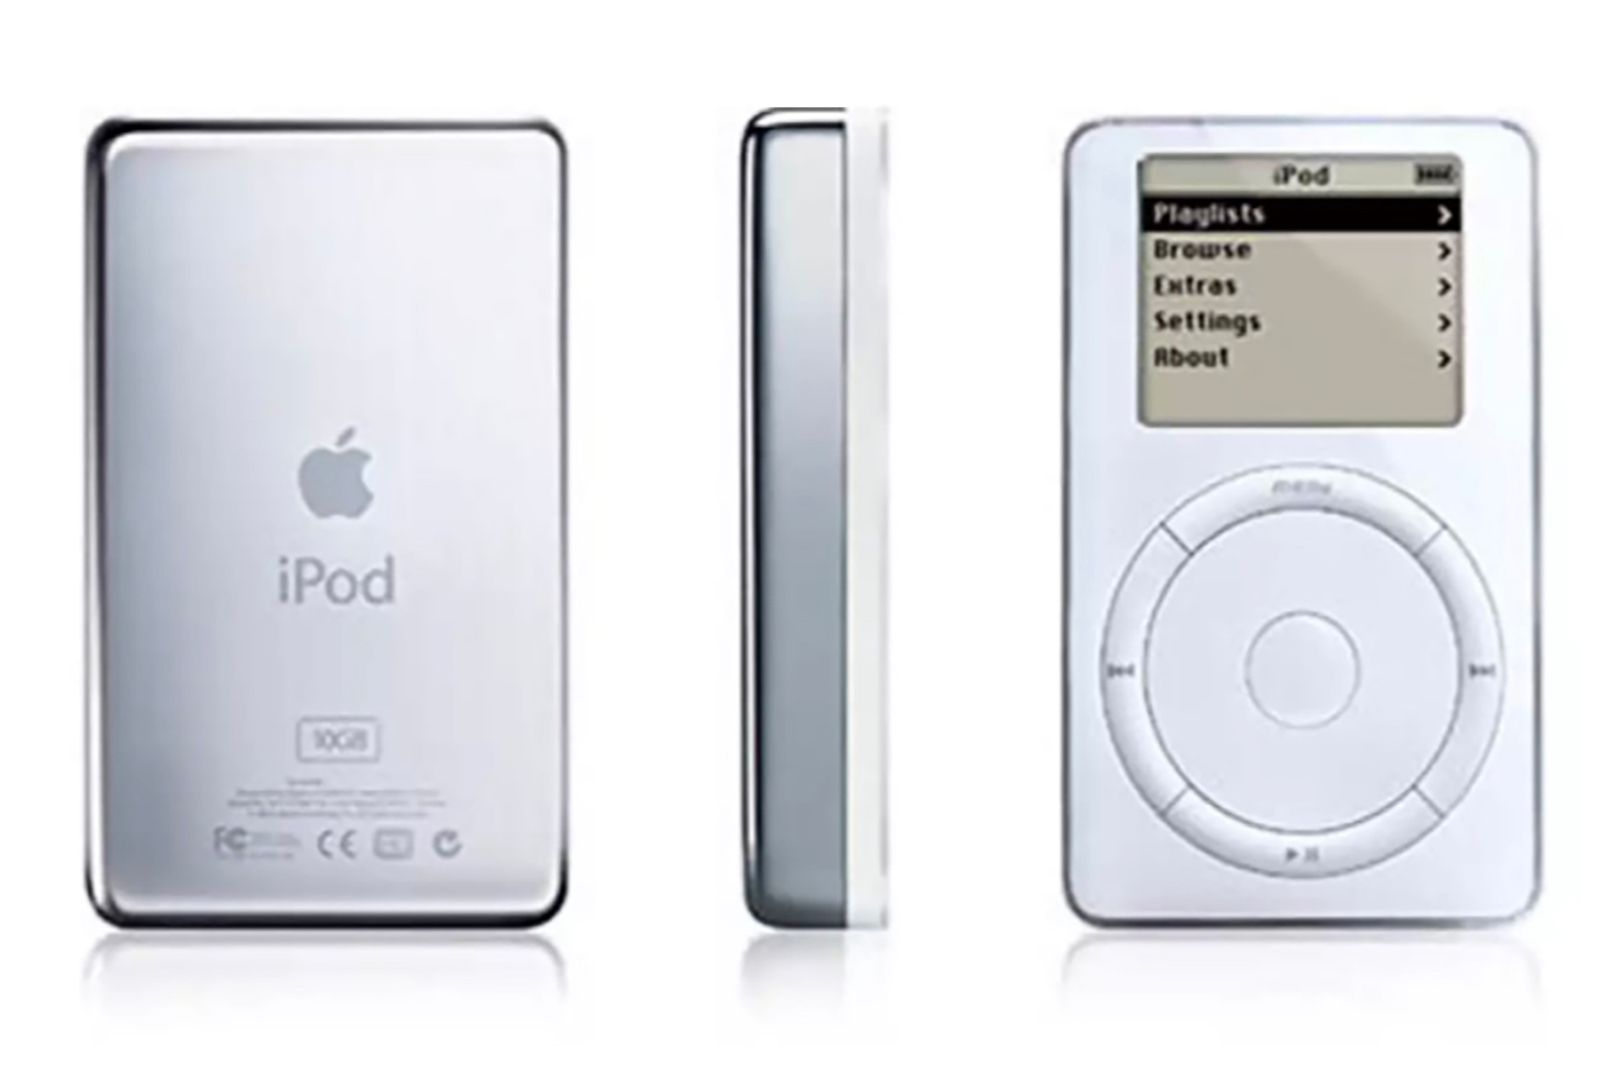 Every Apple iPod Model over the years (2001 to 2022) photo 2